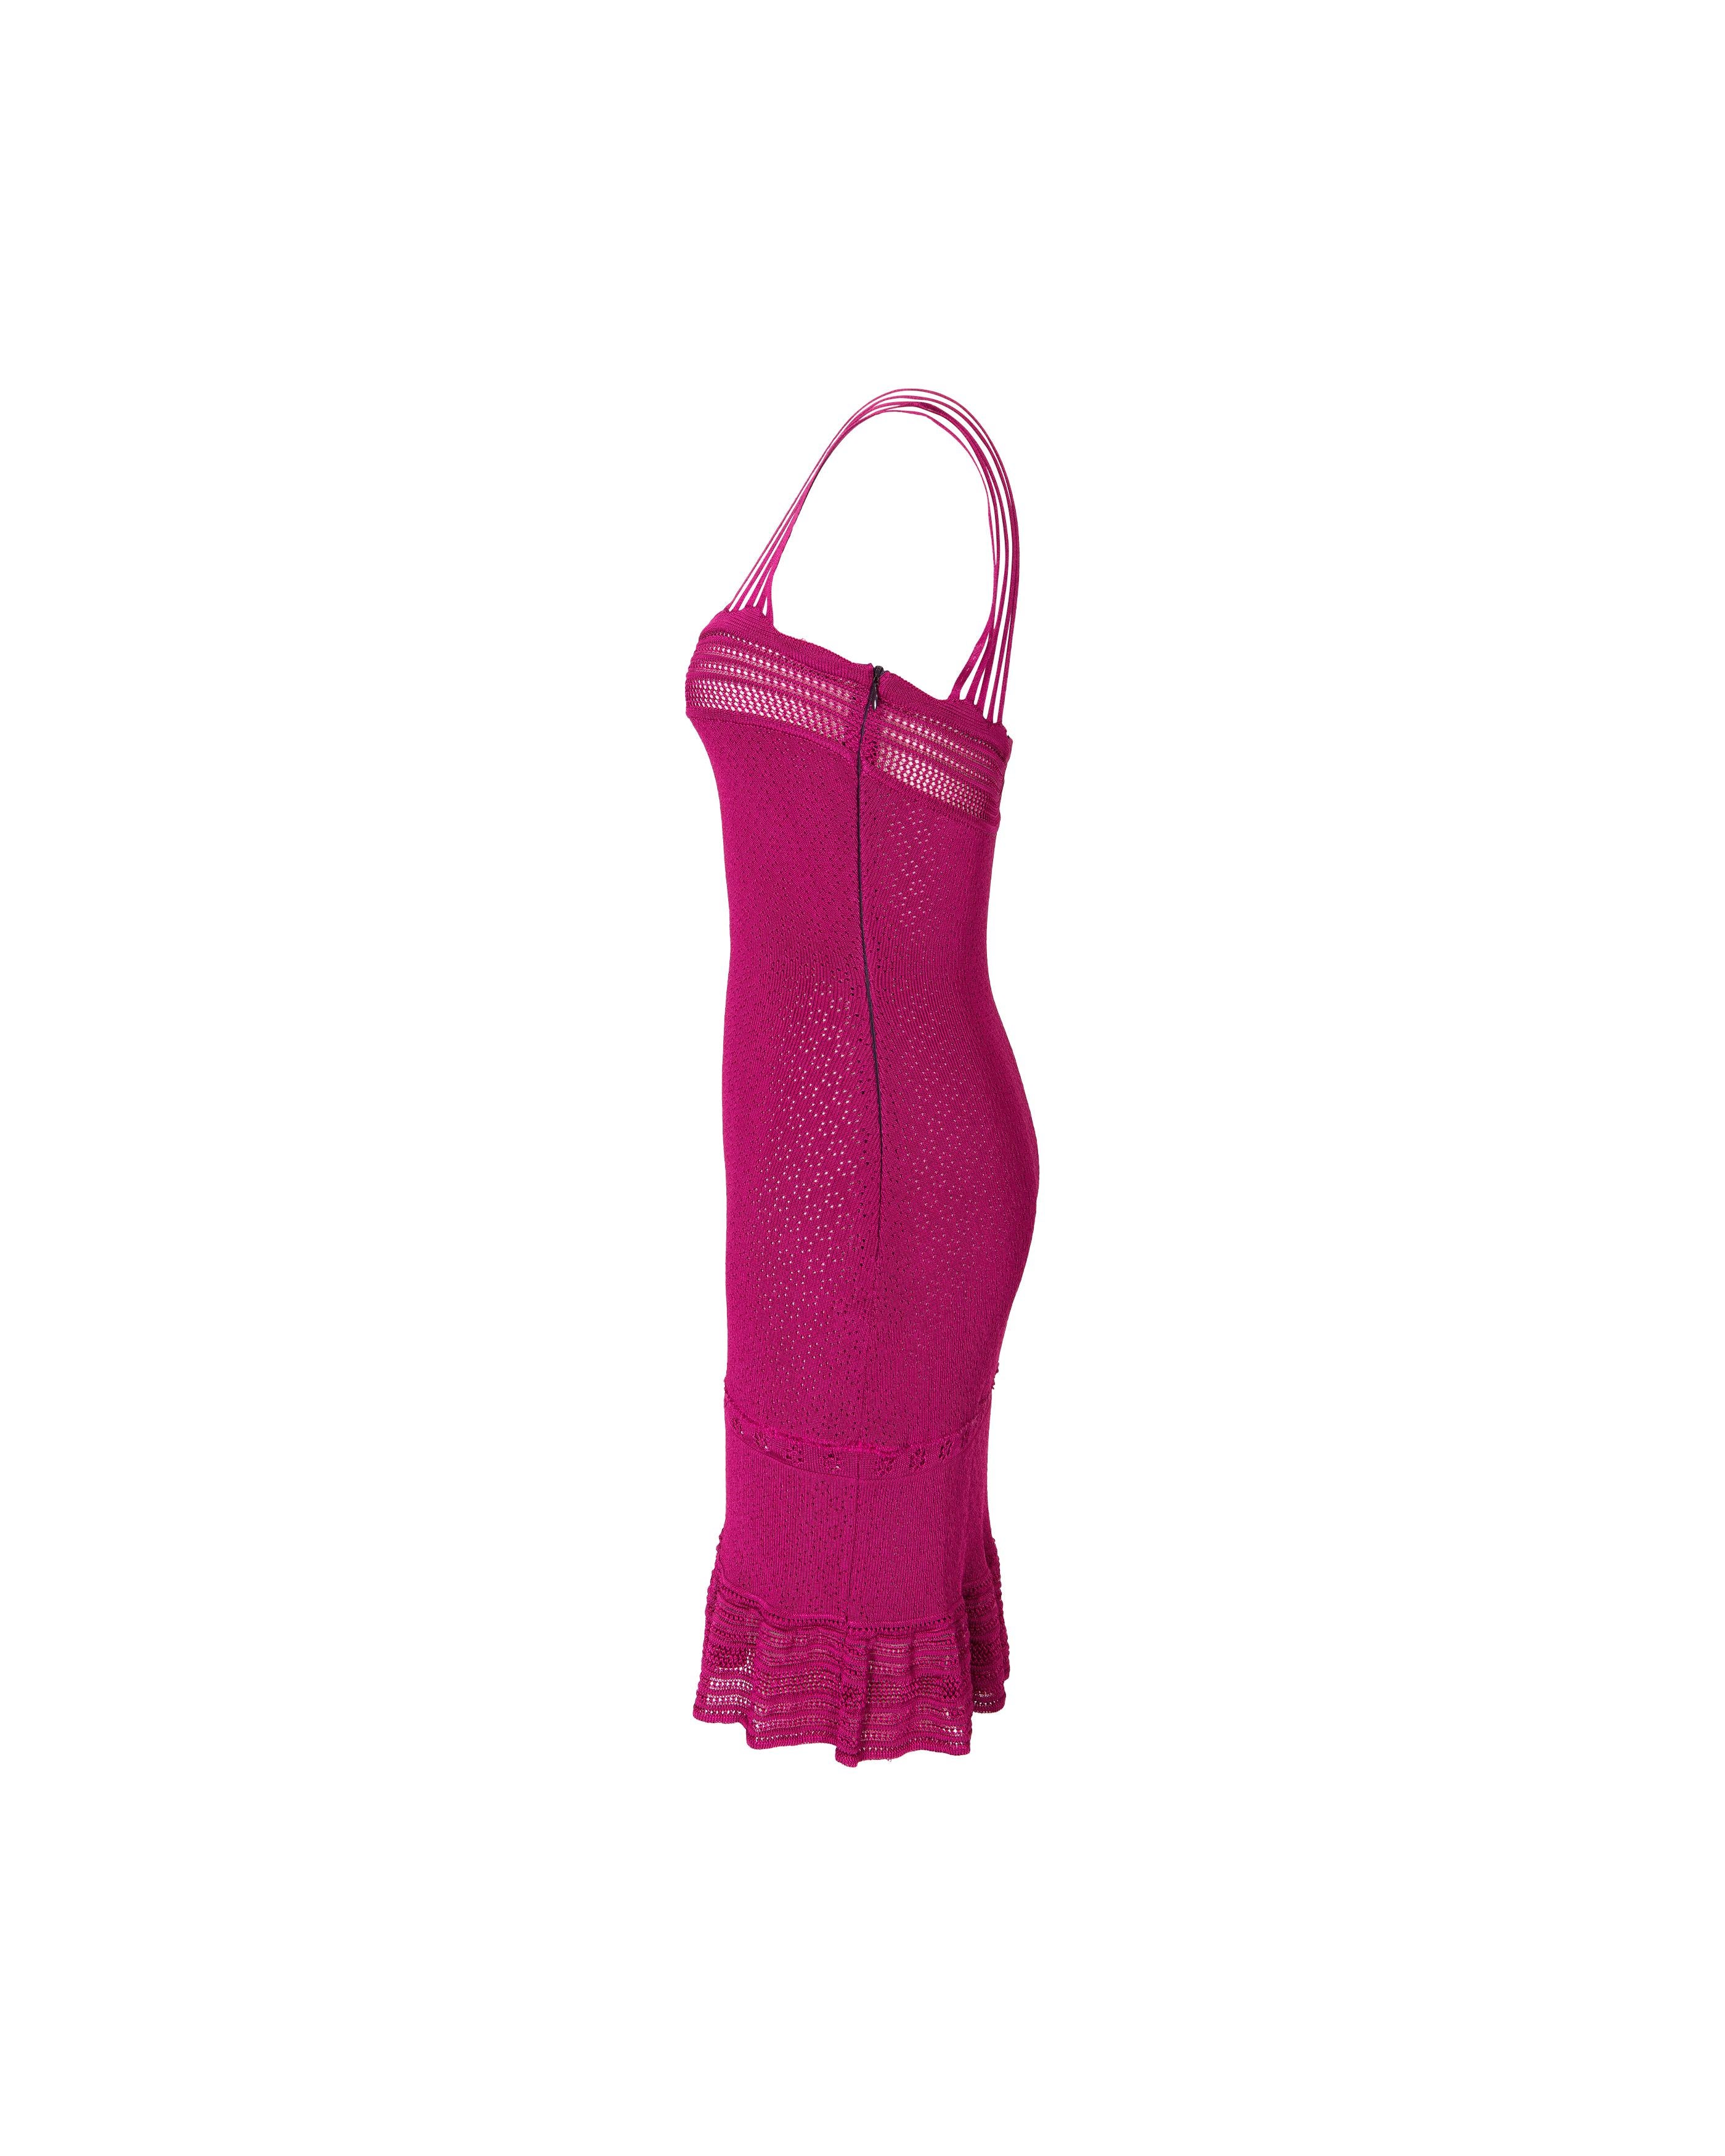 S/S 1998 John Galliano Pink Open-Knit Slip Dress In Excellent Condition In North Hollywood, CA